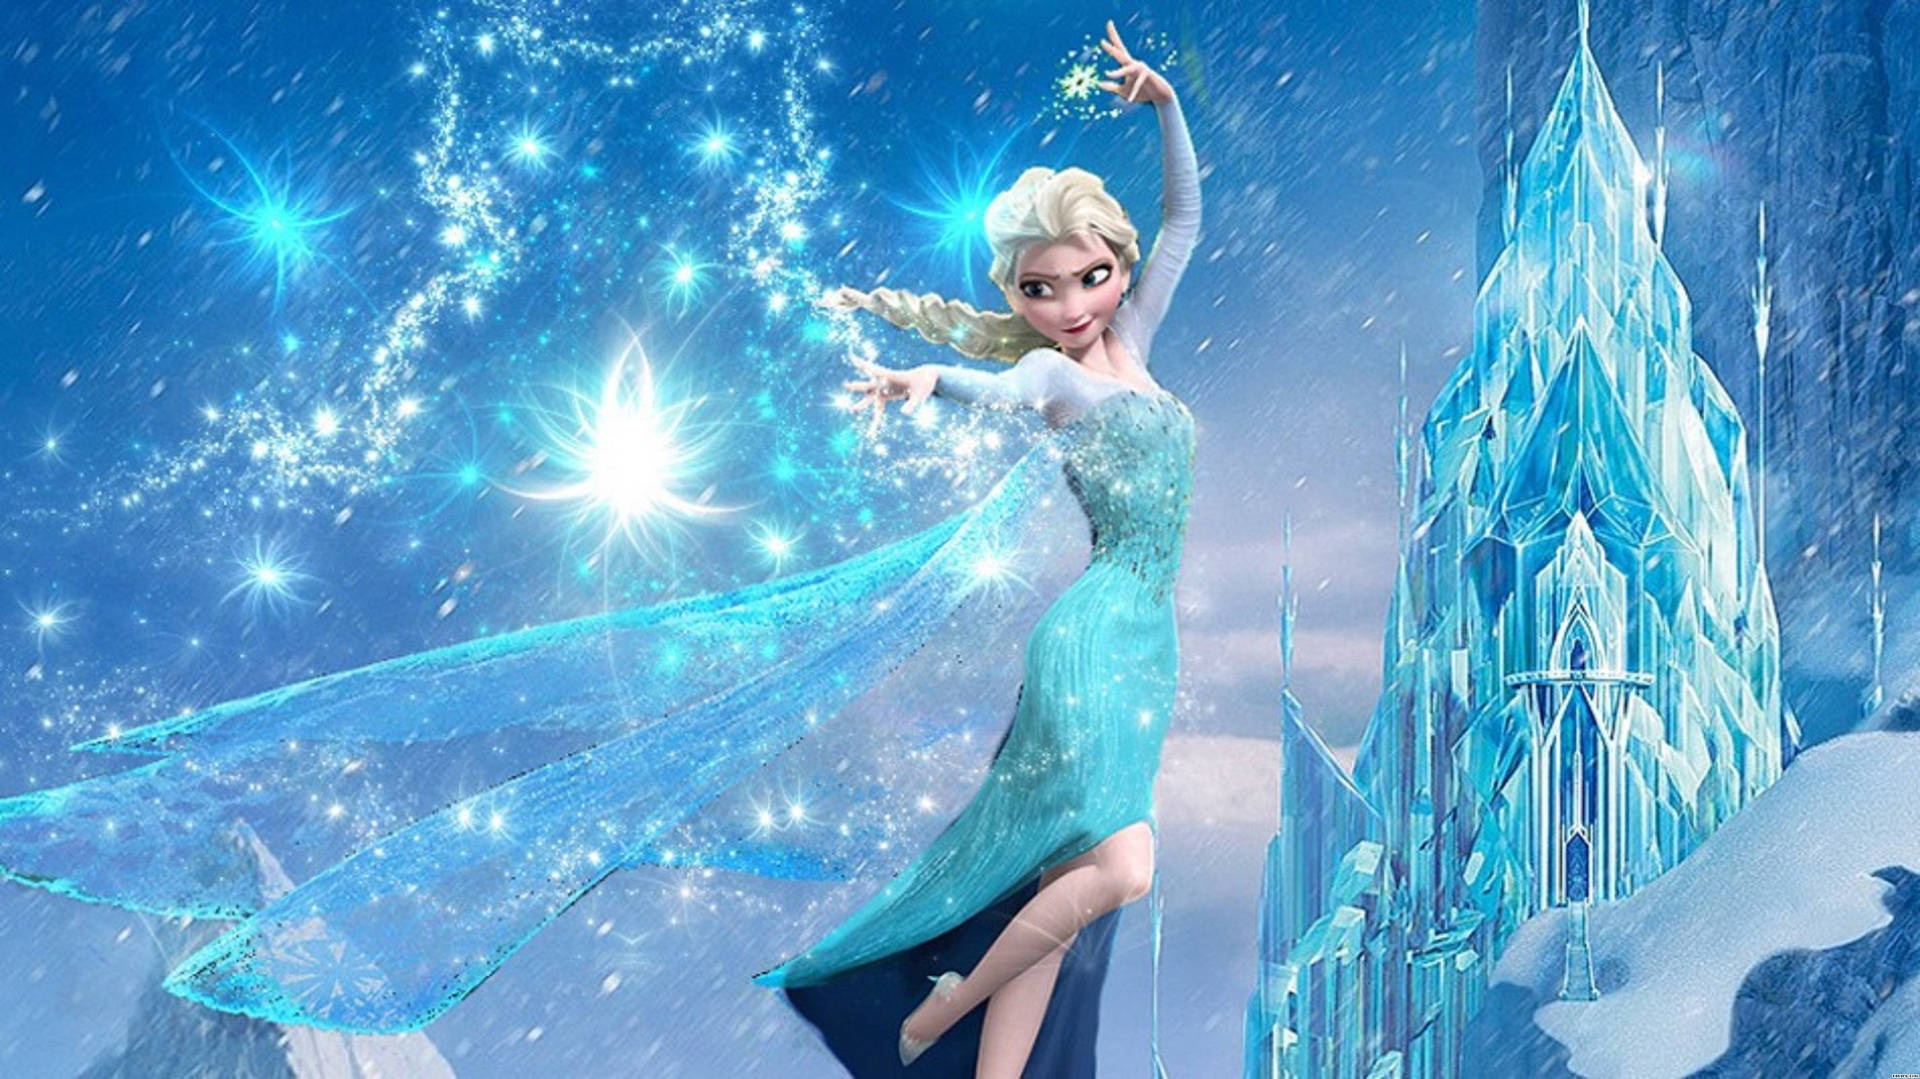 Frozen Live-Action Movie Separating Fact from Fiction